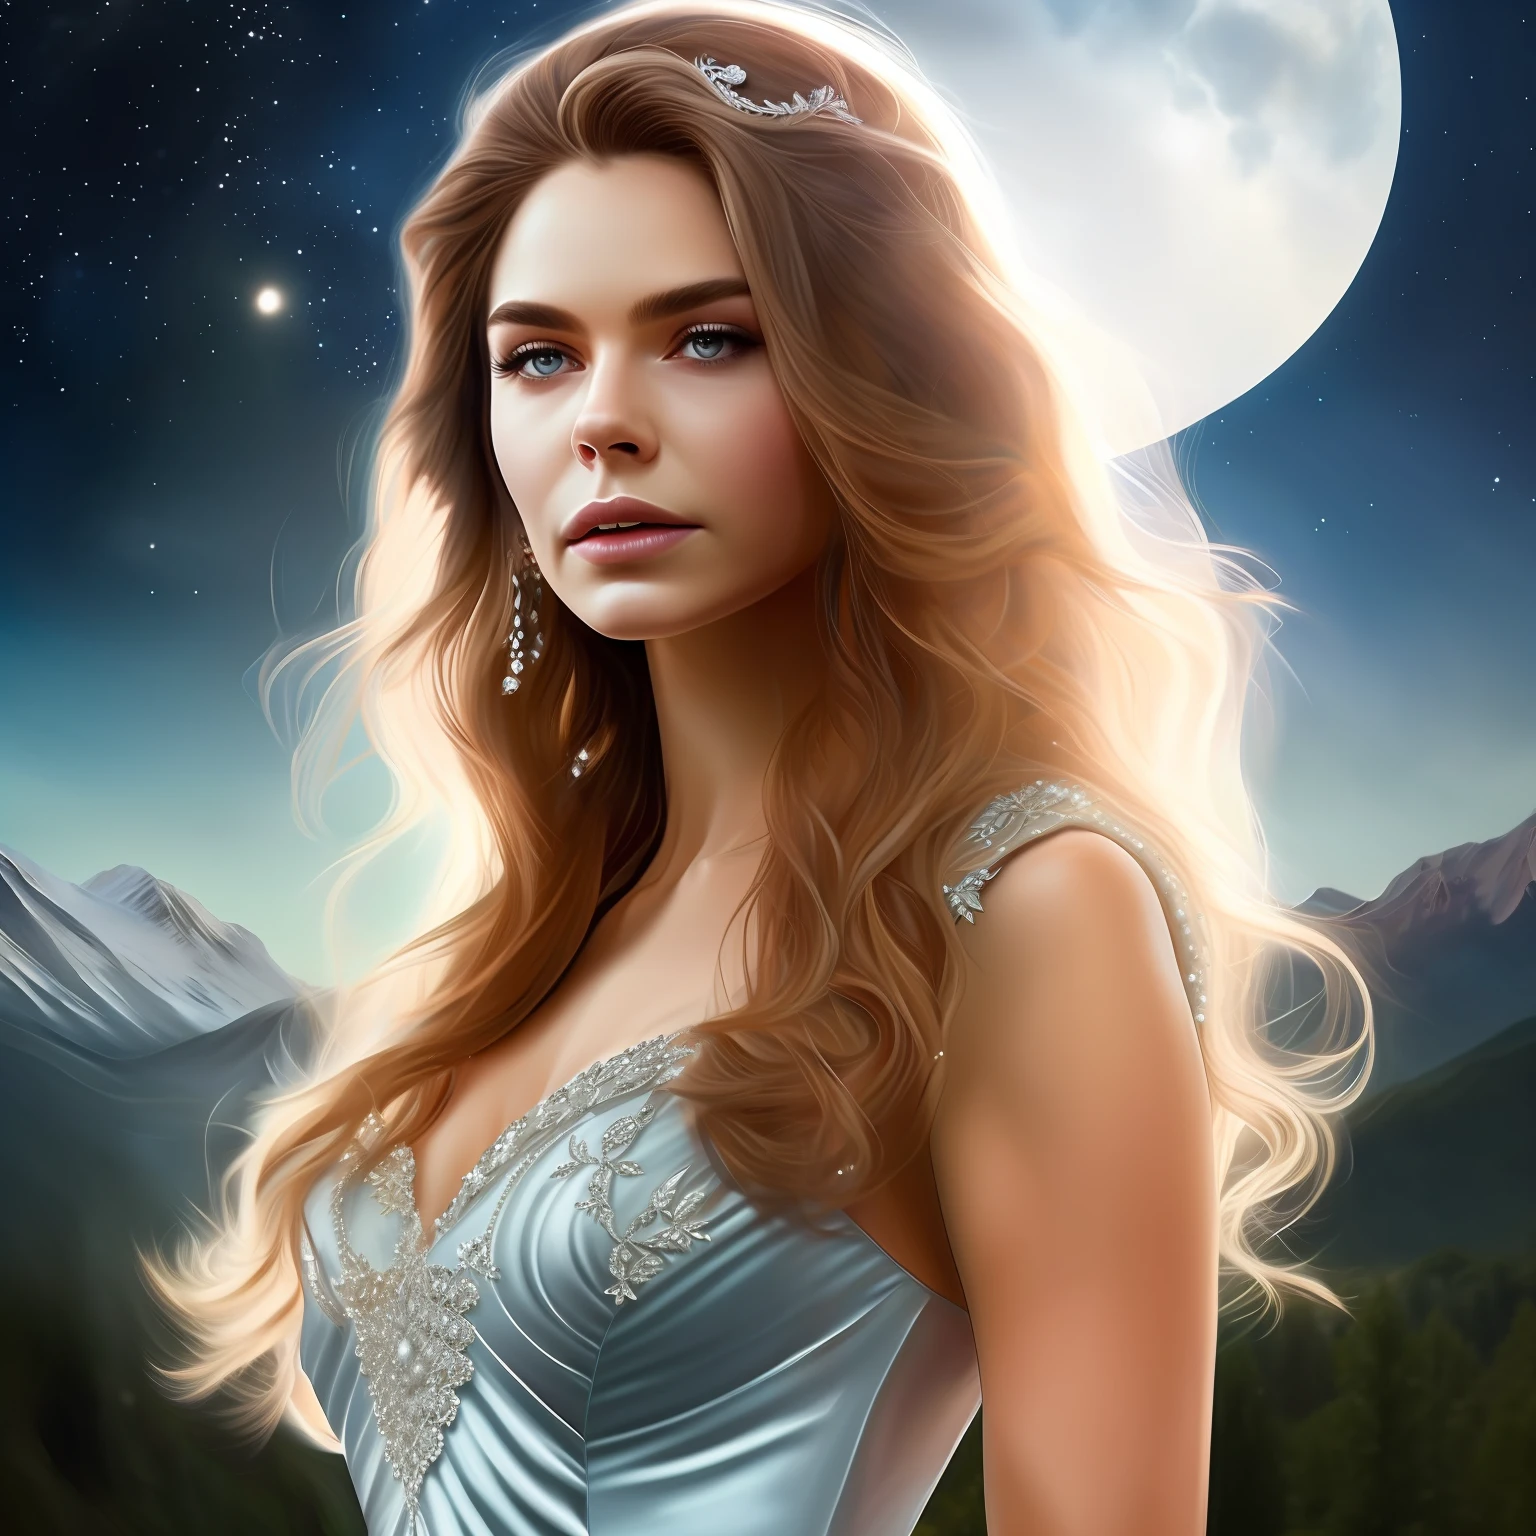 immerse yourself in the enchanting  of Prythian, where magic and wonder dance beneath a star-studded sky. At the heart of this breathtaking scene stands Feyre Archeron, adorned in a light blue gown that shimmers like moonlight ,The setting is the illustrious Starfall, a celestial event where faeries and mortals converge in a celebration of love and beauty. Feyre is positioned on a balcony overlooking the festivities, her face lifted towards the heavens. The vast expanse of the night sky stretches out before her, adorned with a multitude of twinkling stars that mirror the radiance within her eyes.in this wide-angle view, the artist captures the grandeur of the night, showcasing the sprawling gardens and delicate moonlit pathways that wind through the festivities. The atmosphere is ethereal, with soft, cool hues deftly capturing the otherworldly essence of the event.
Feyre's expression is one of awe and wonder as she takes in the breathtaking spectacle before her. Her  blonde hair, kissed by the moonlight, cascades down her back, framing her face like a crown. Her gown billows slightly in the gentle breeze, evoking a sense of movement and grace.The artist skillfully portrays the energy of the